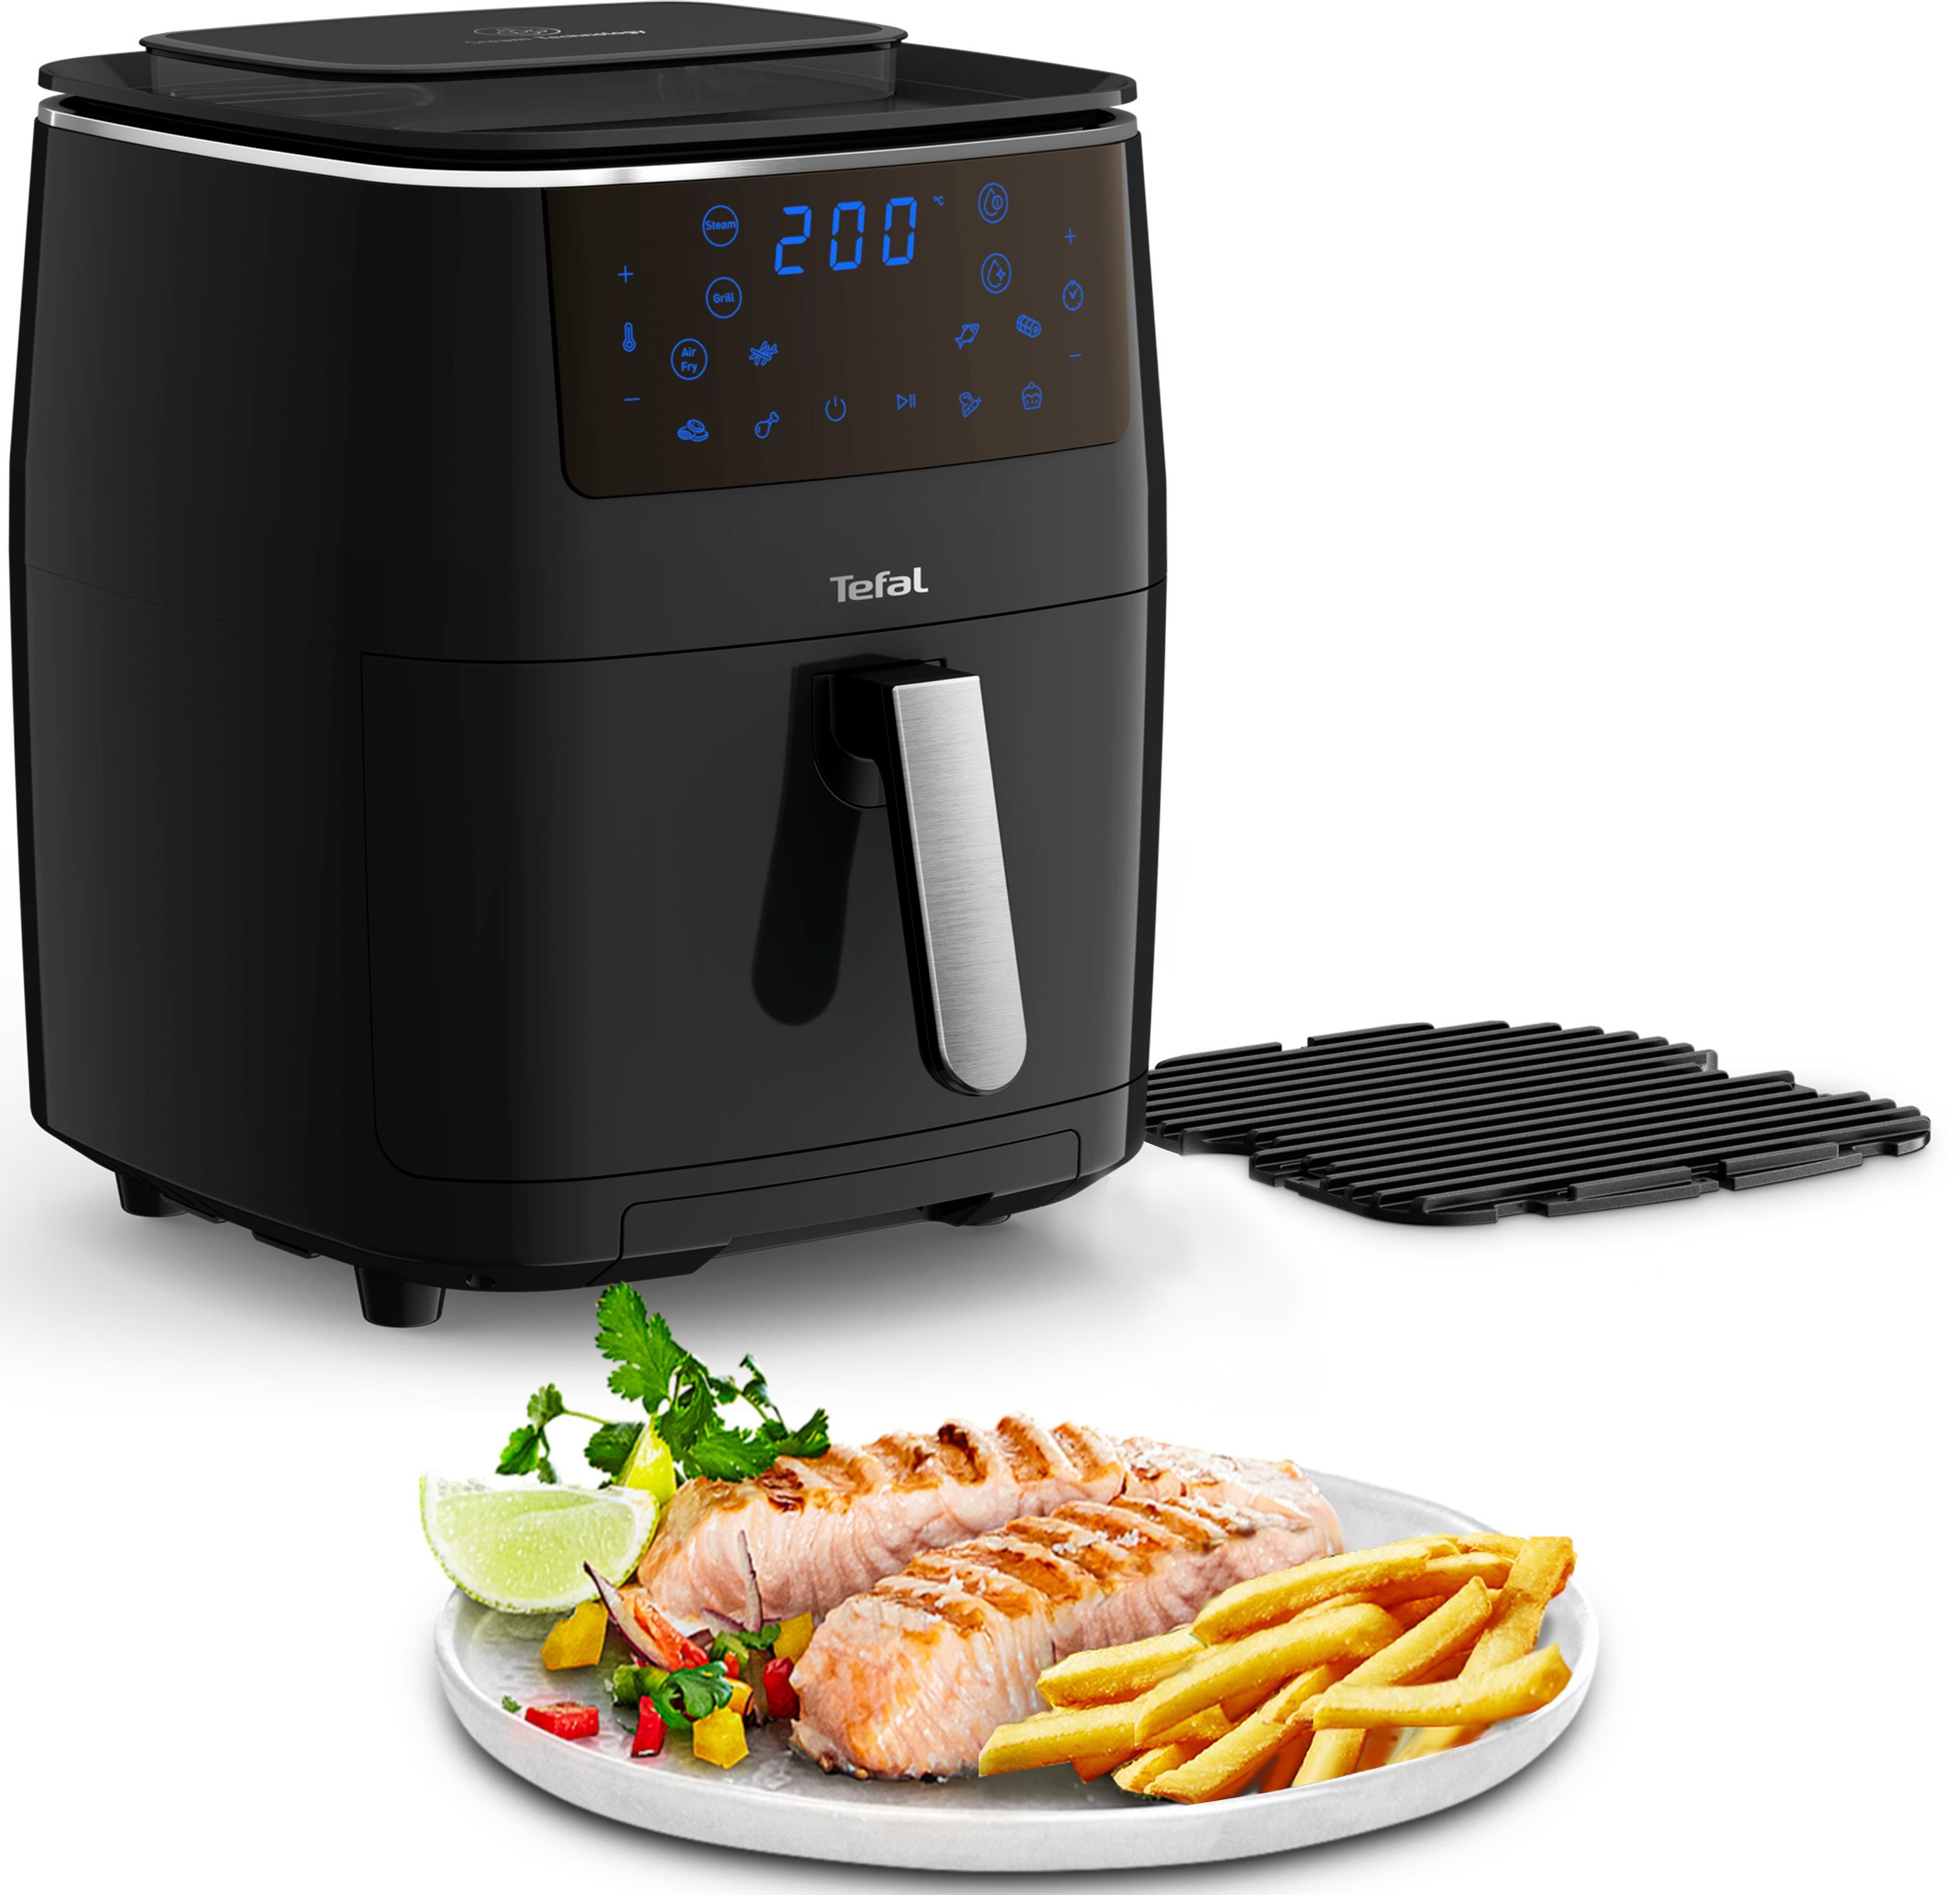 Programme, Easy W, Grill automatische Tefal 1700 FW2018 Grill + & Heißluftfritteuse Fry 7 Dampfgarer, Steam,